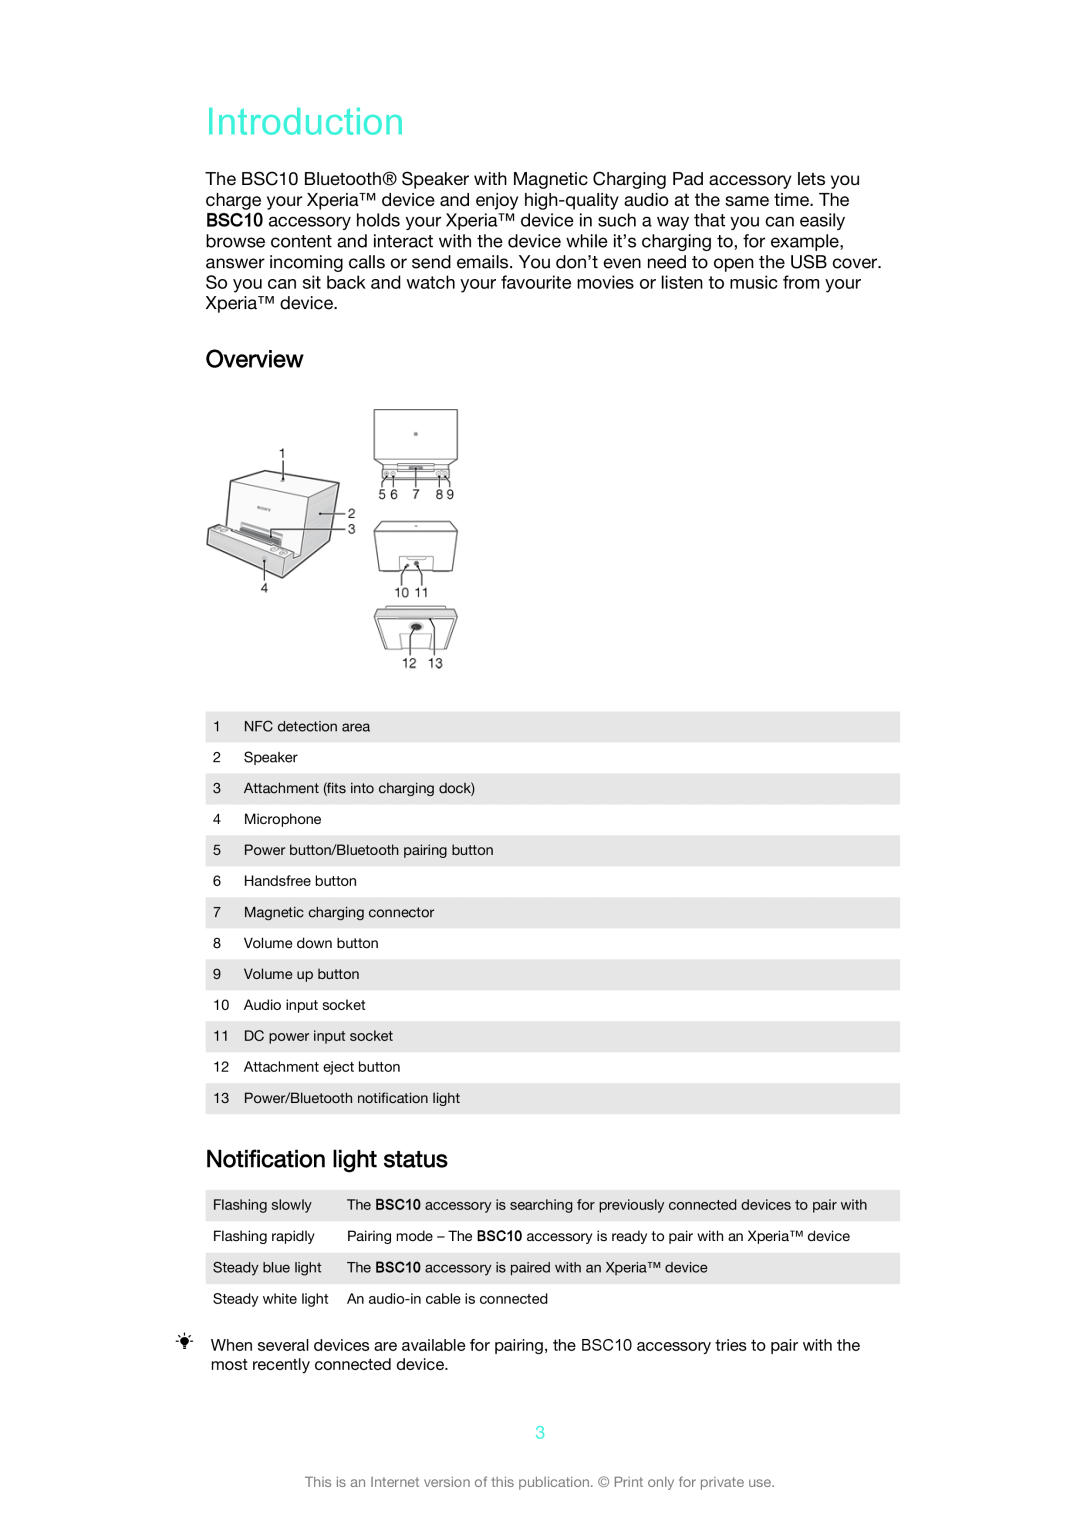 Sony BSC10 manual Introduction, Overview, Notification light status 